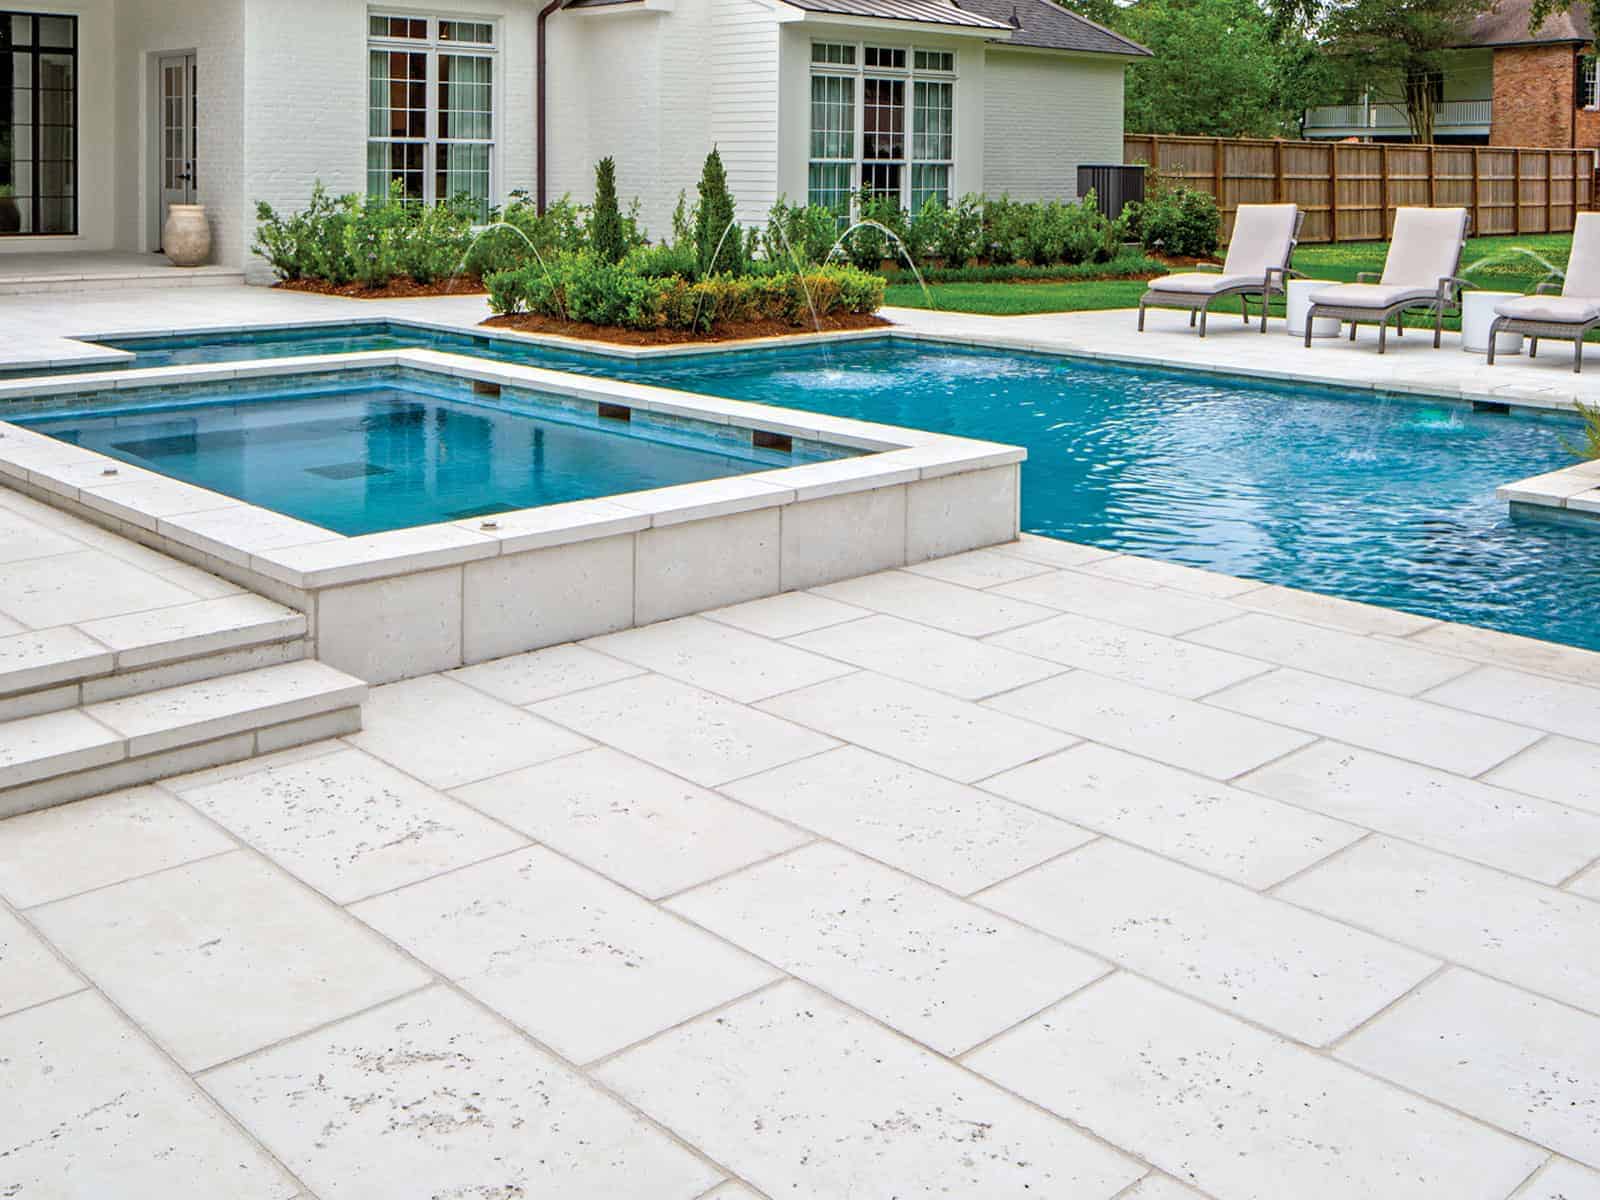 How to Style Cool Swimming Pools | Peacock Pavers